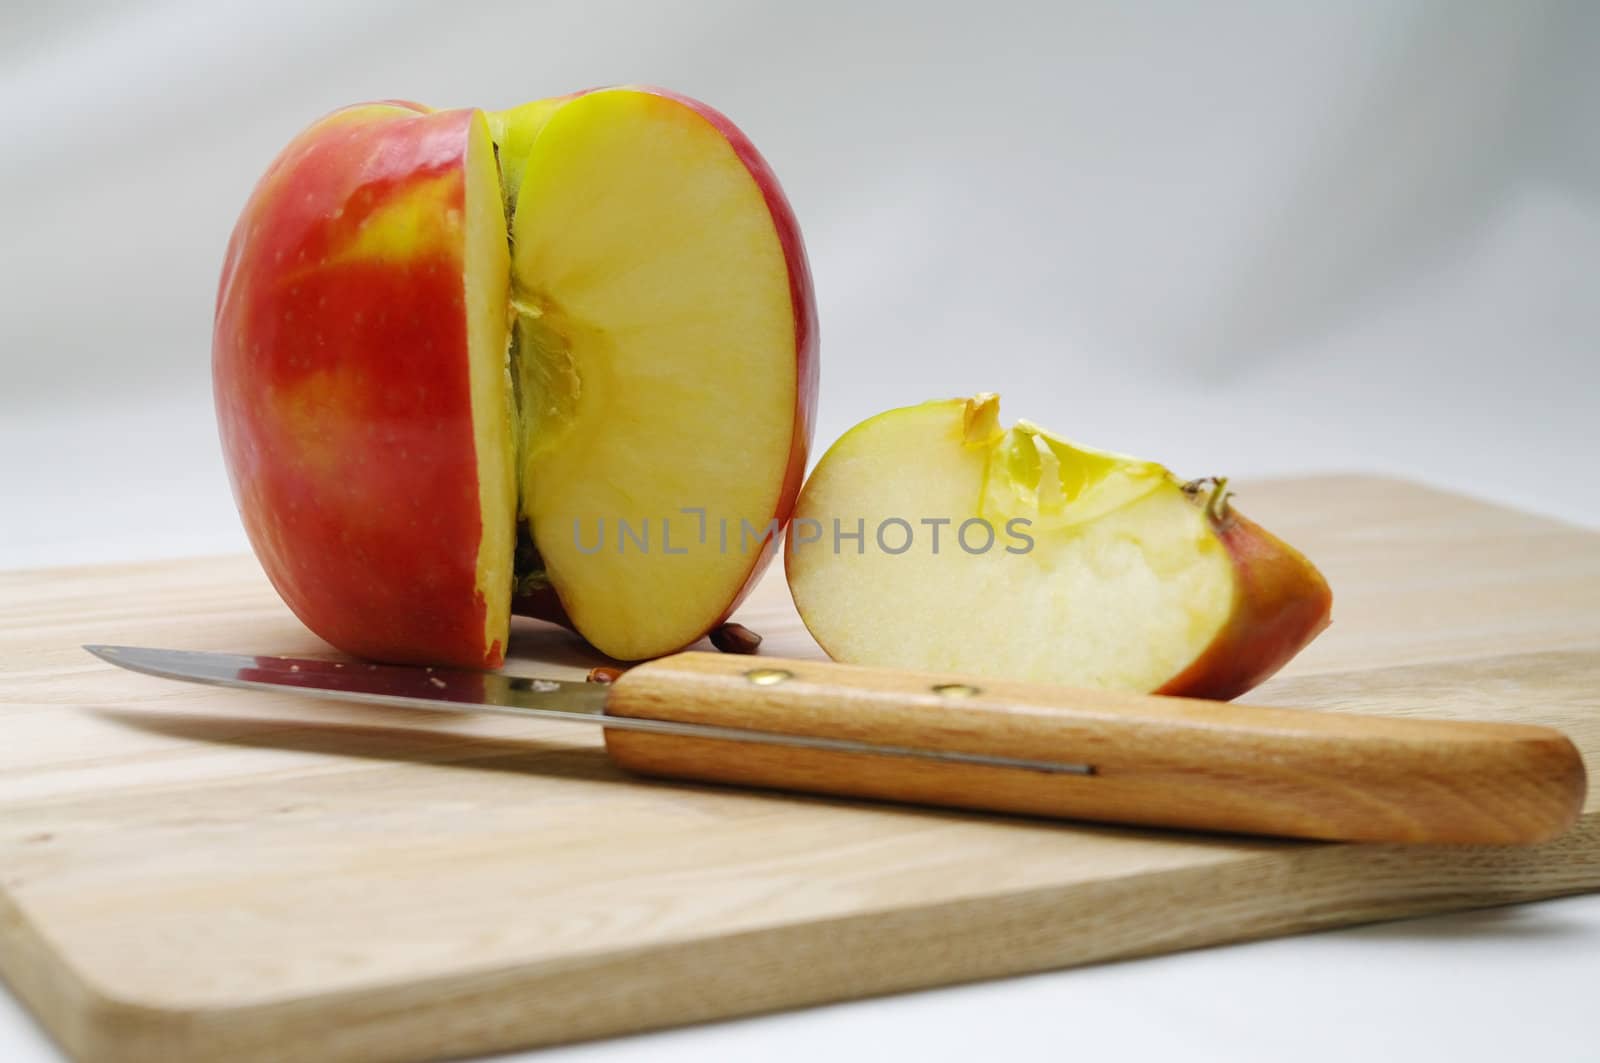 An apple sliced ready for eating with a knife